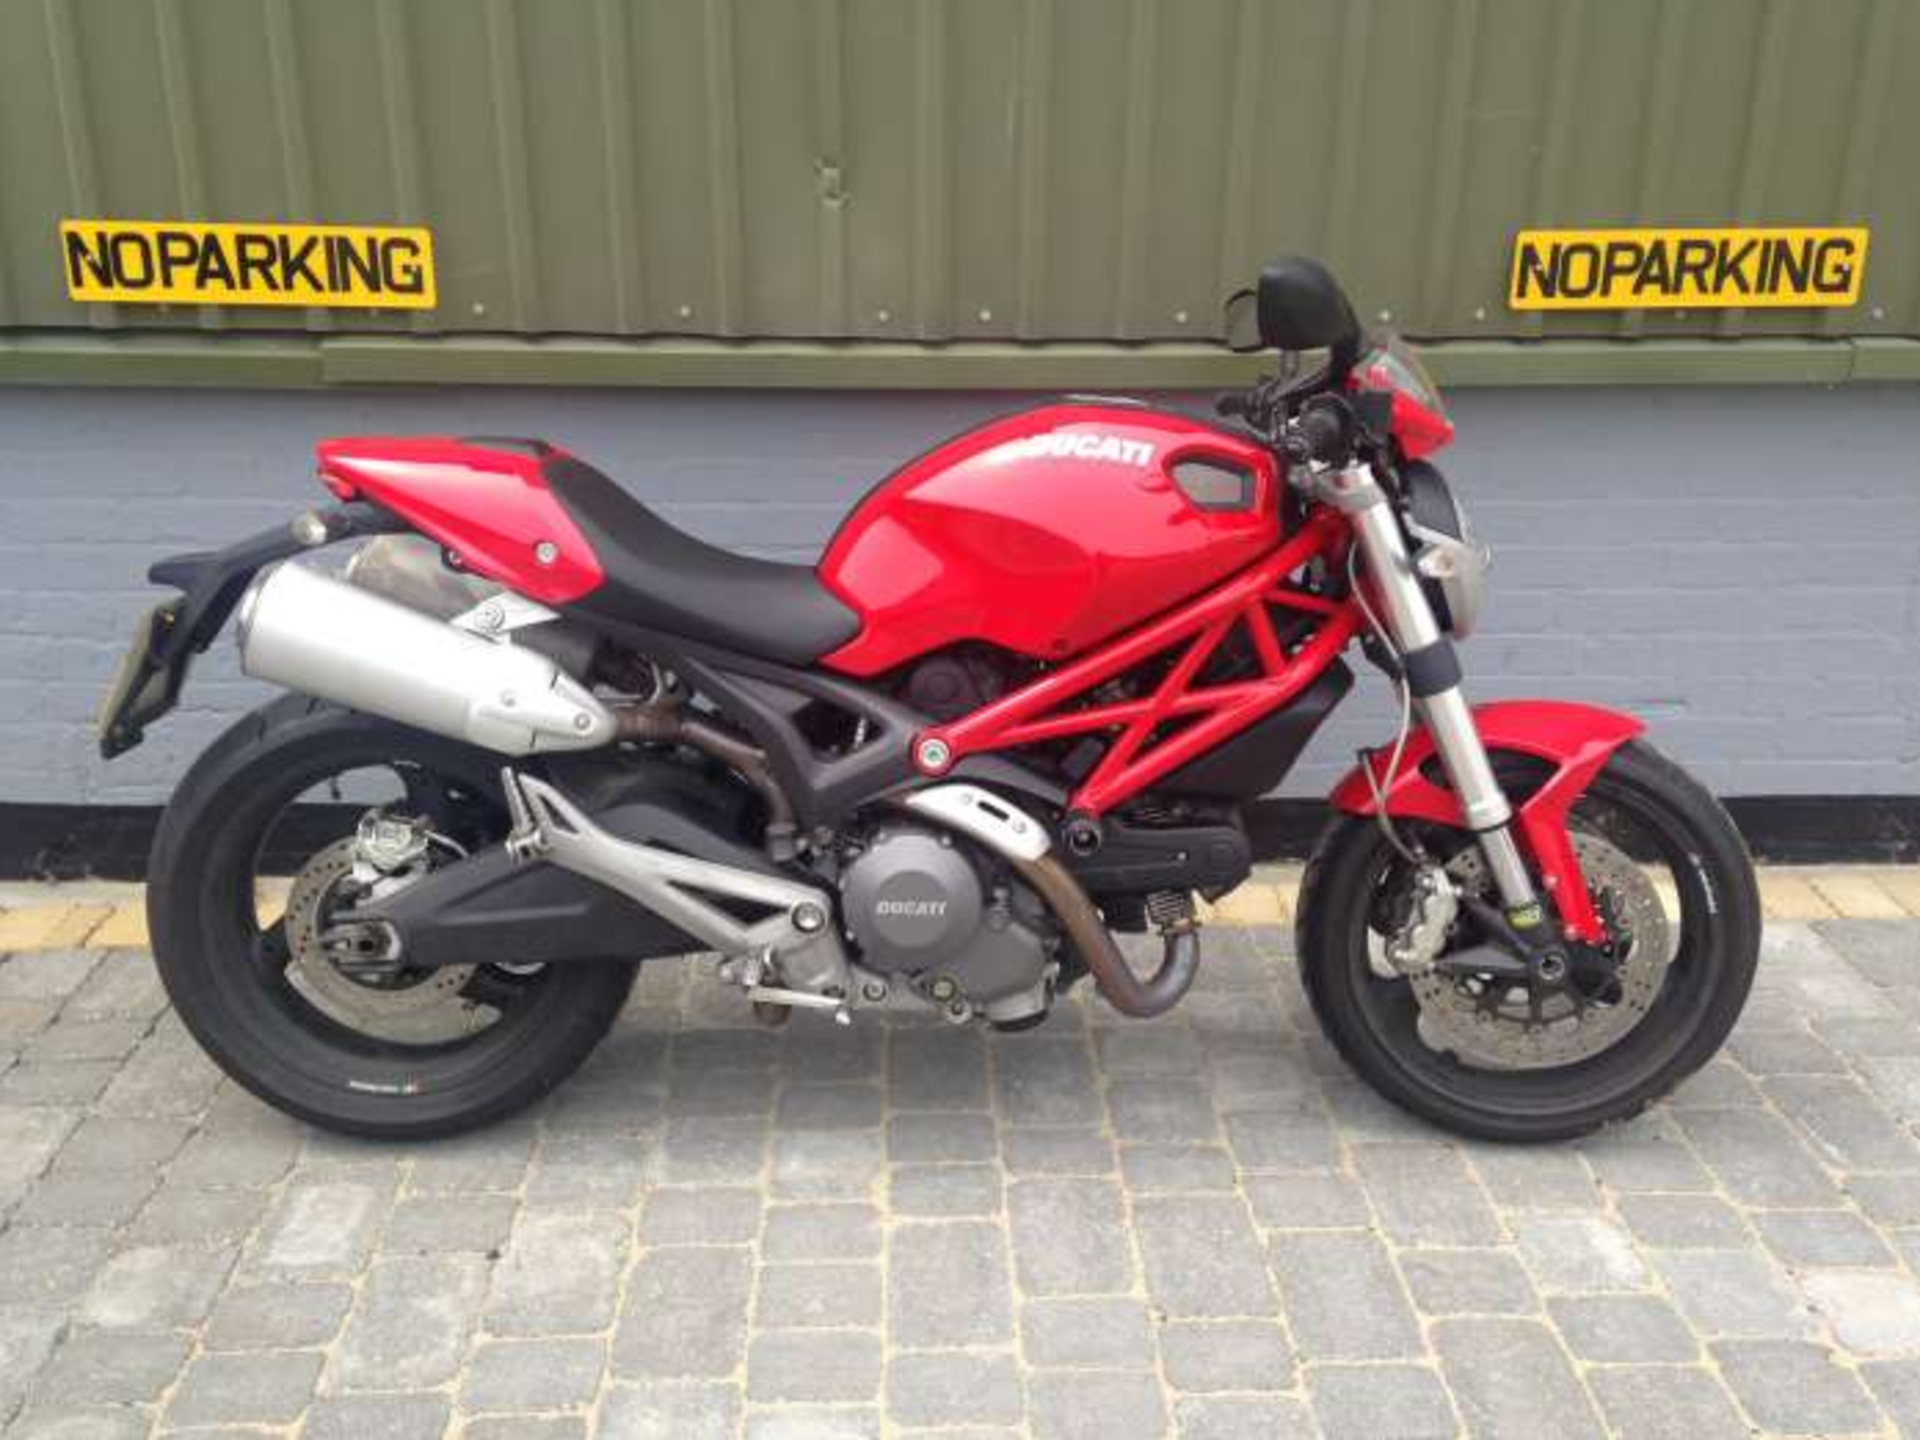 2009 Ducati 696 Monster - Very low mileage - Image 10 of 11